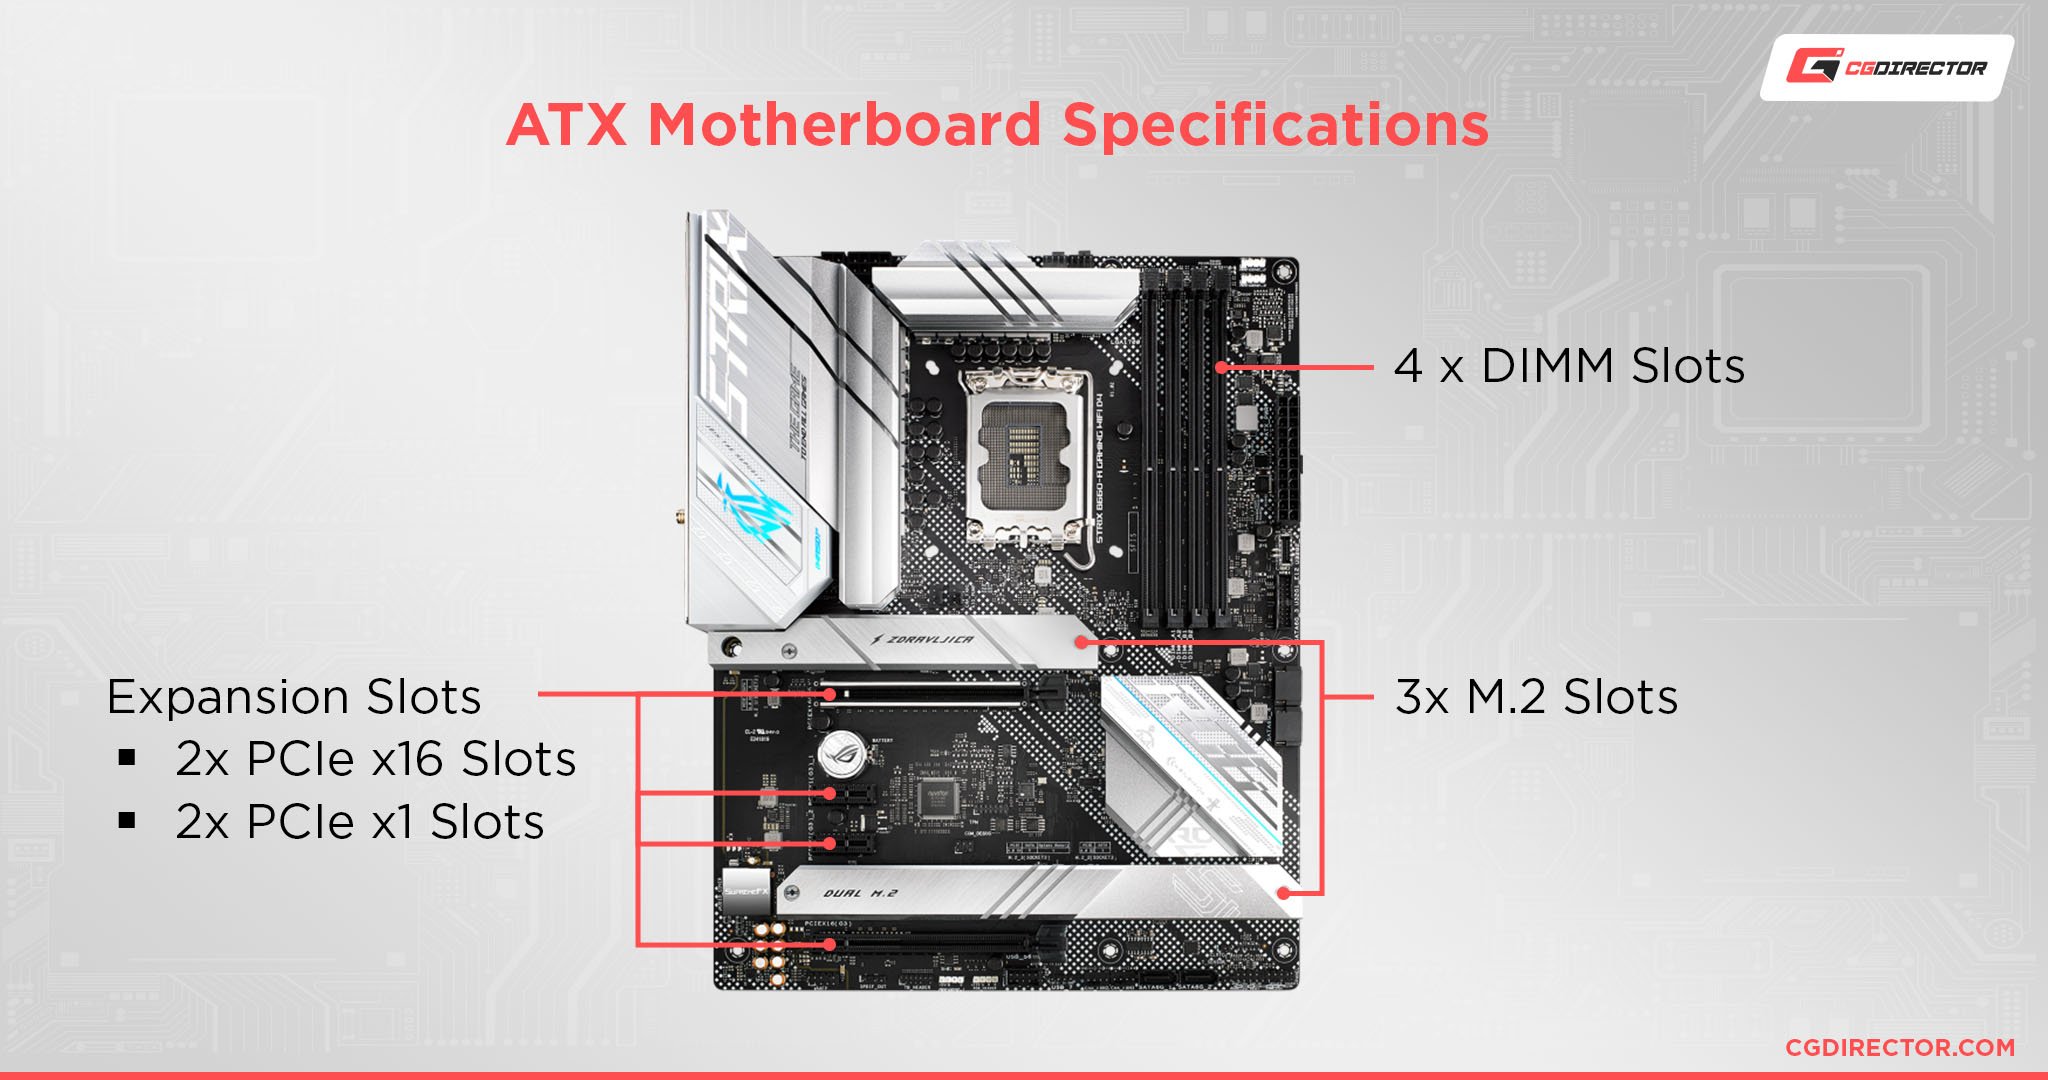 ATX Motherboard Specifications